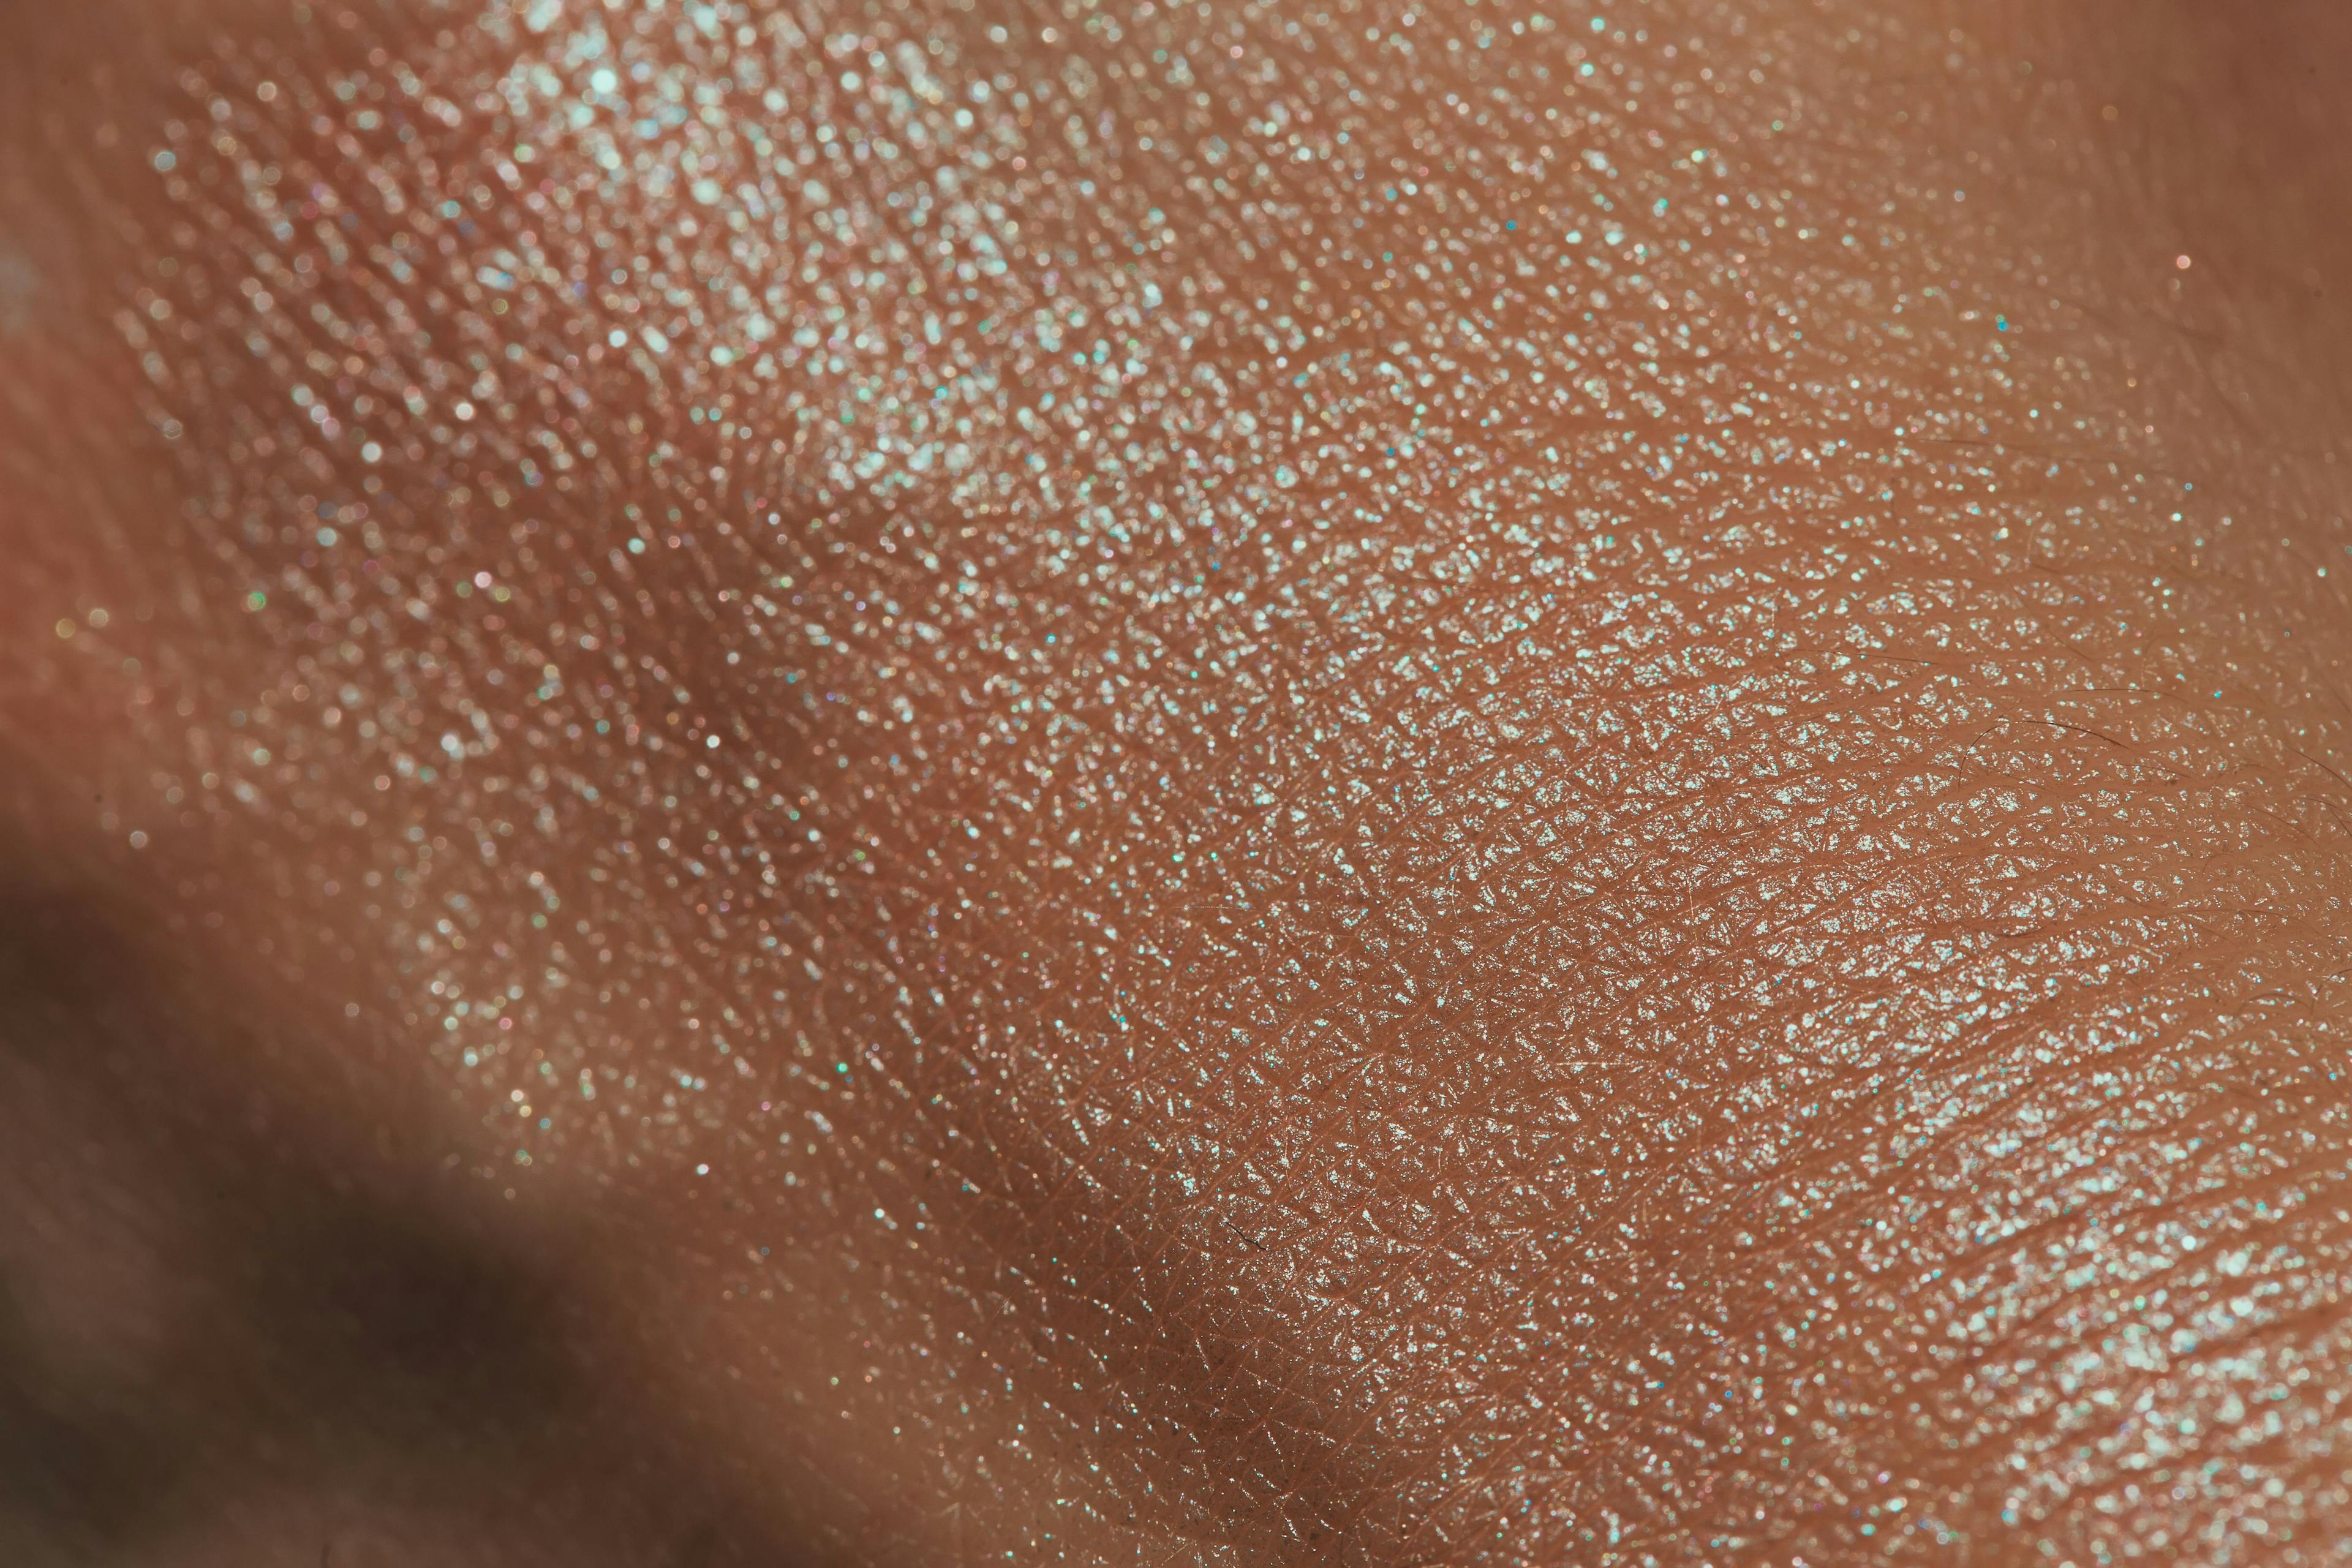 texture of human skin with liquid highlighter swatch | Image Credit: © viki2103stock - stock.adobe.com